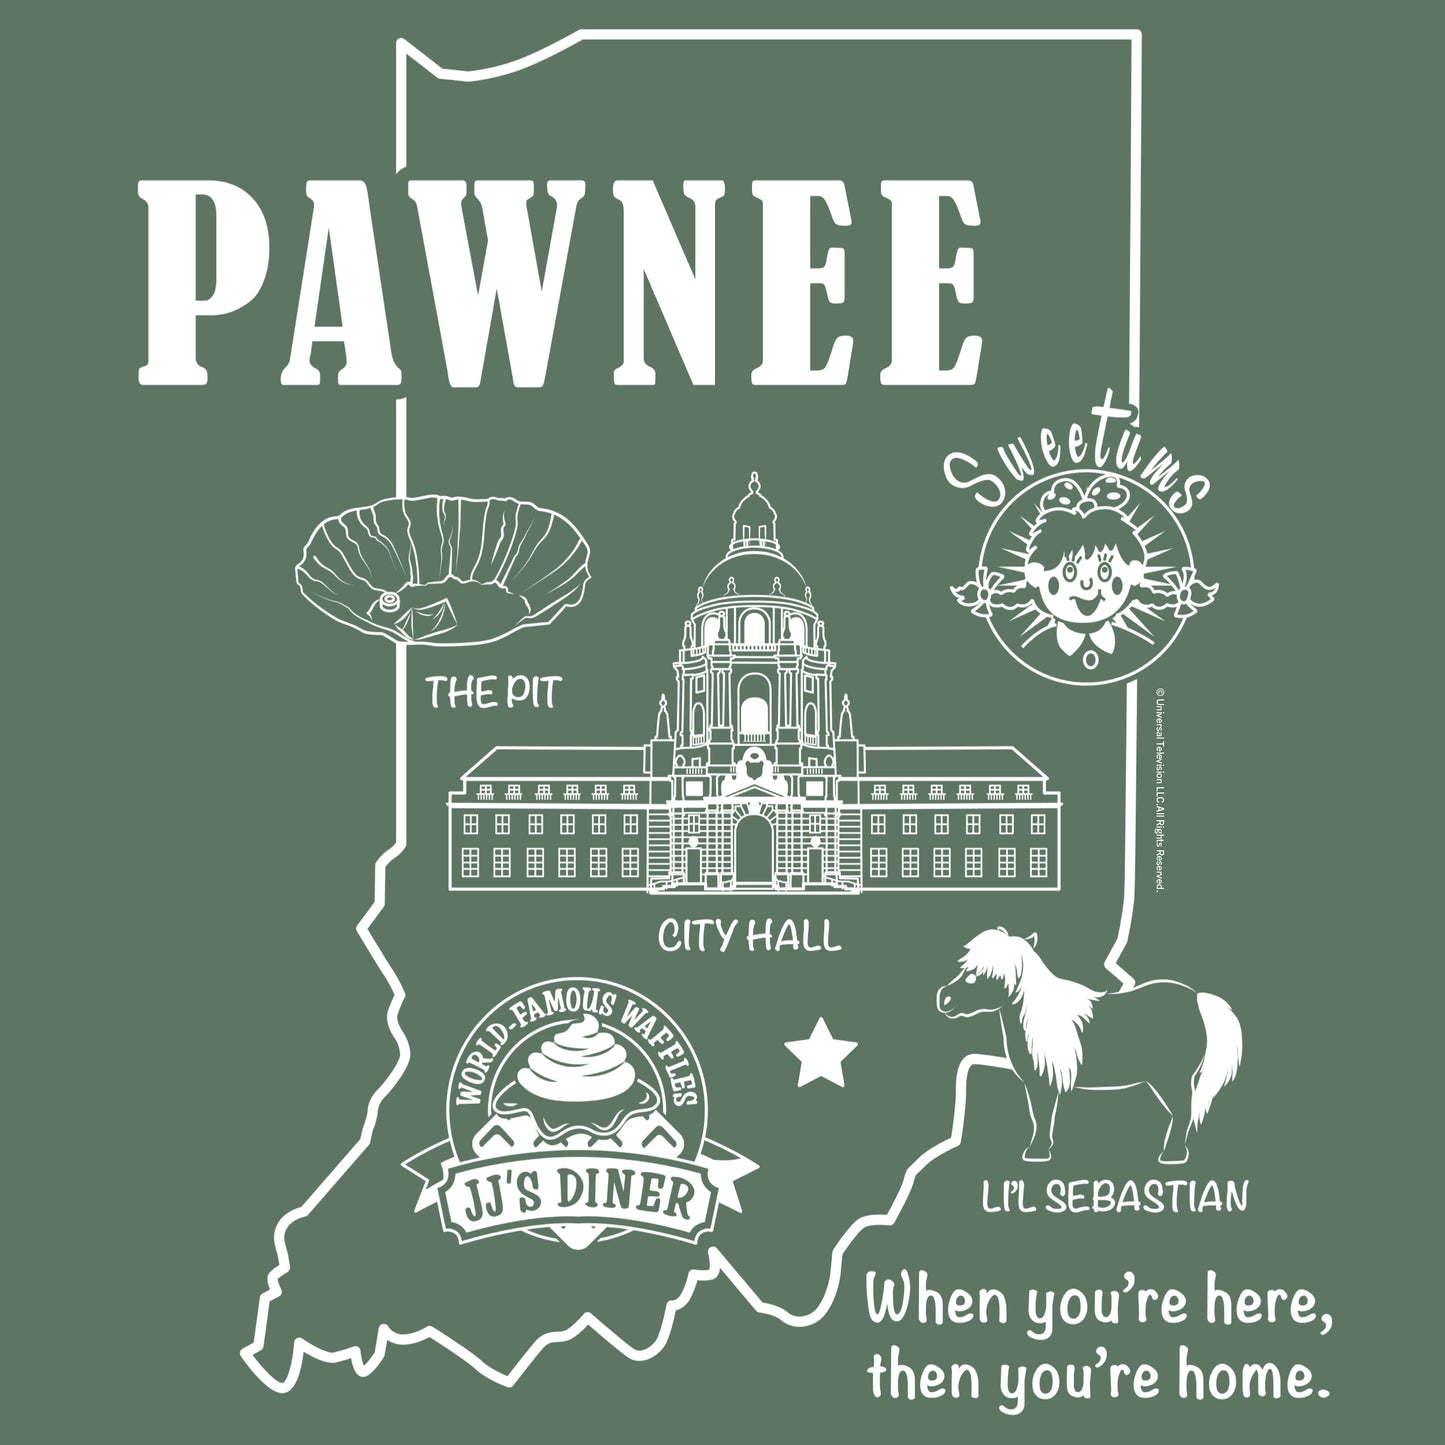 Parks and Recreation Pawnee Indiana Map Sherpa Blanket